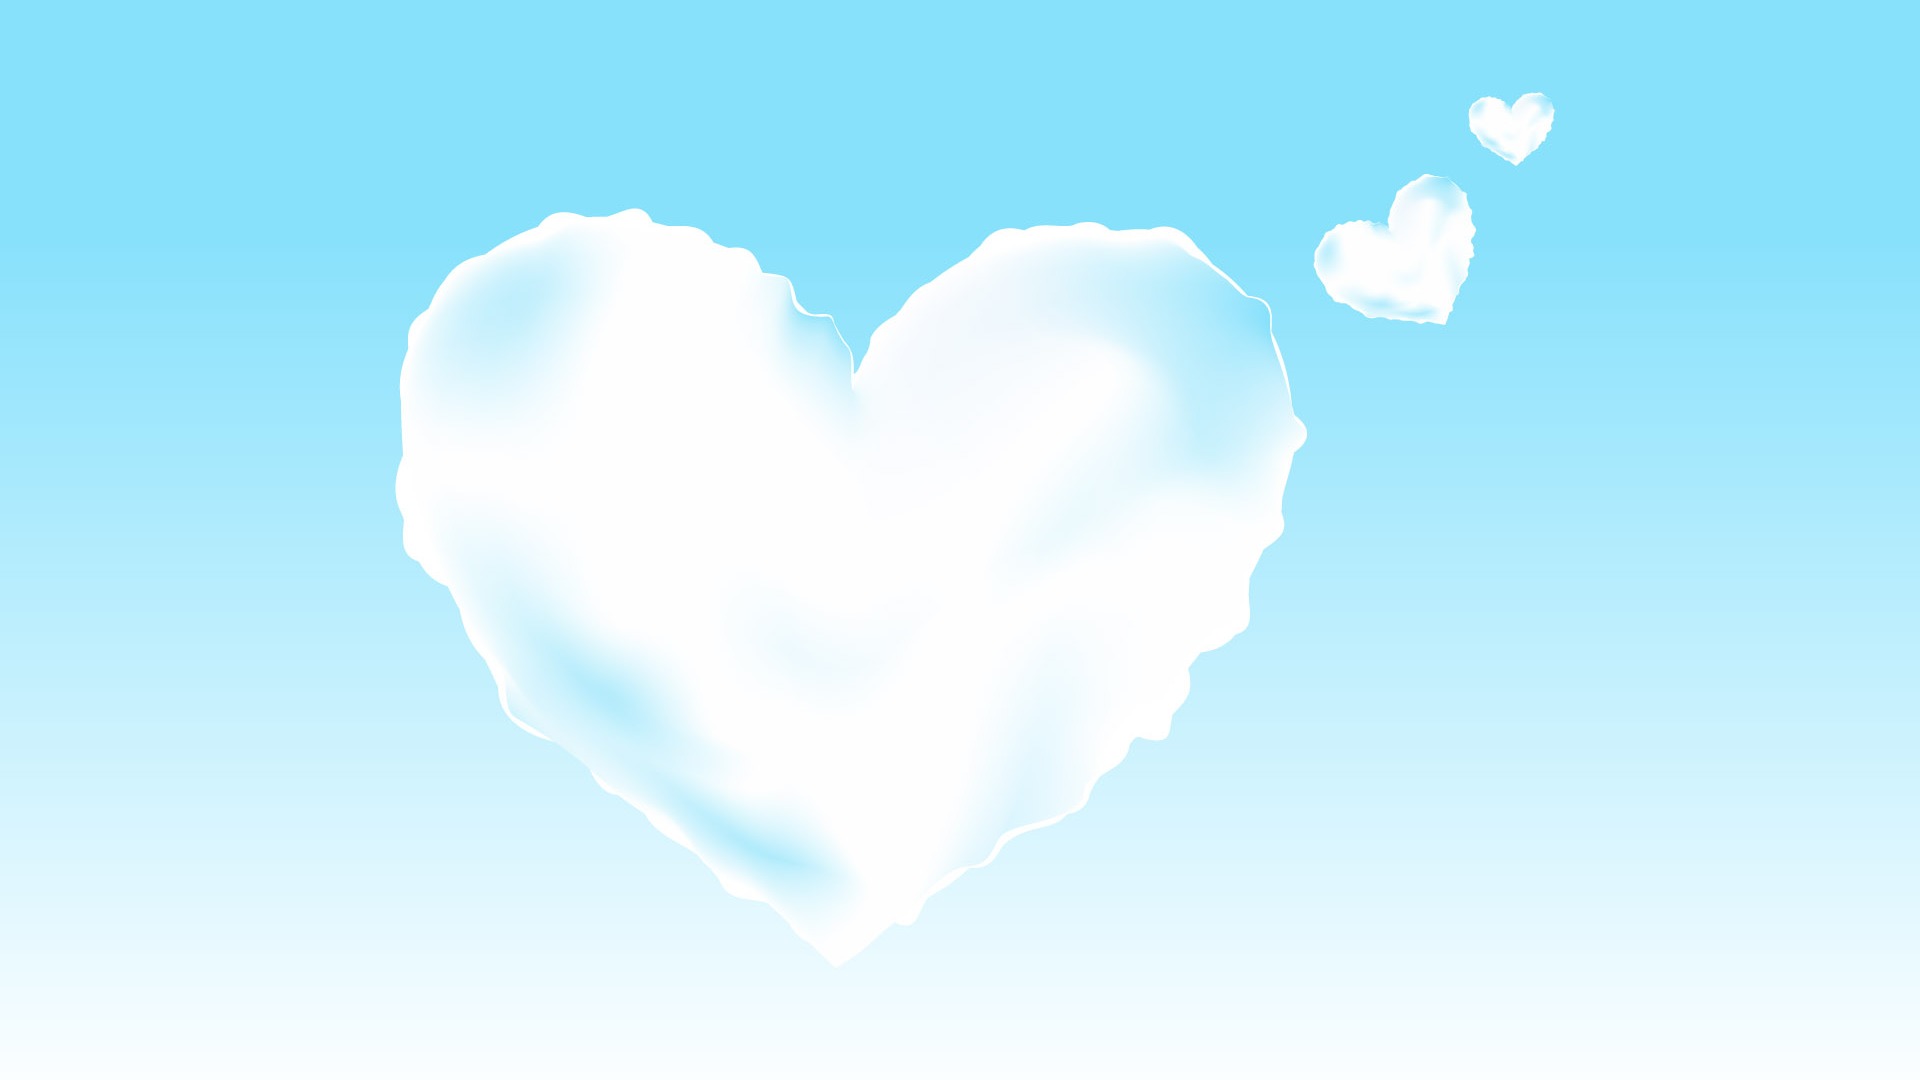 Valentine's Day Love Theme Wallpapers (3) #20 - 1920x1080